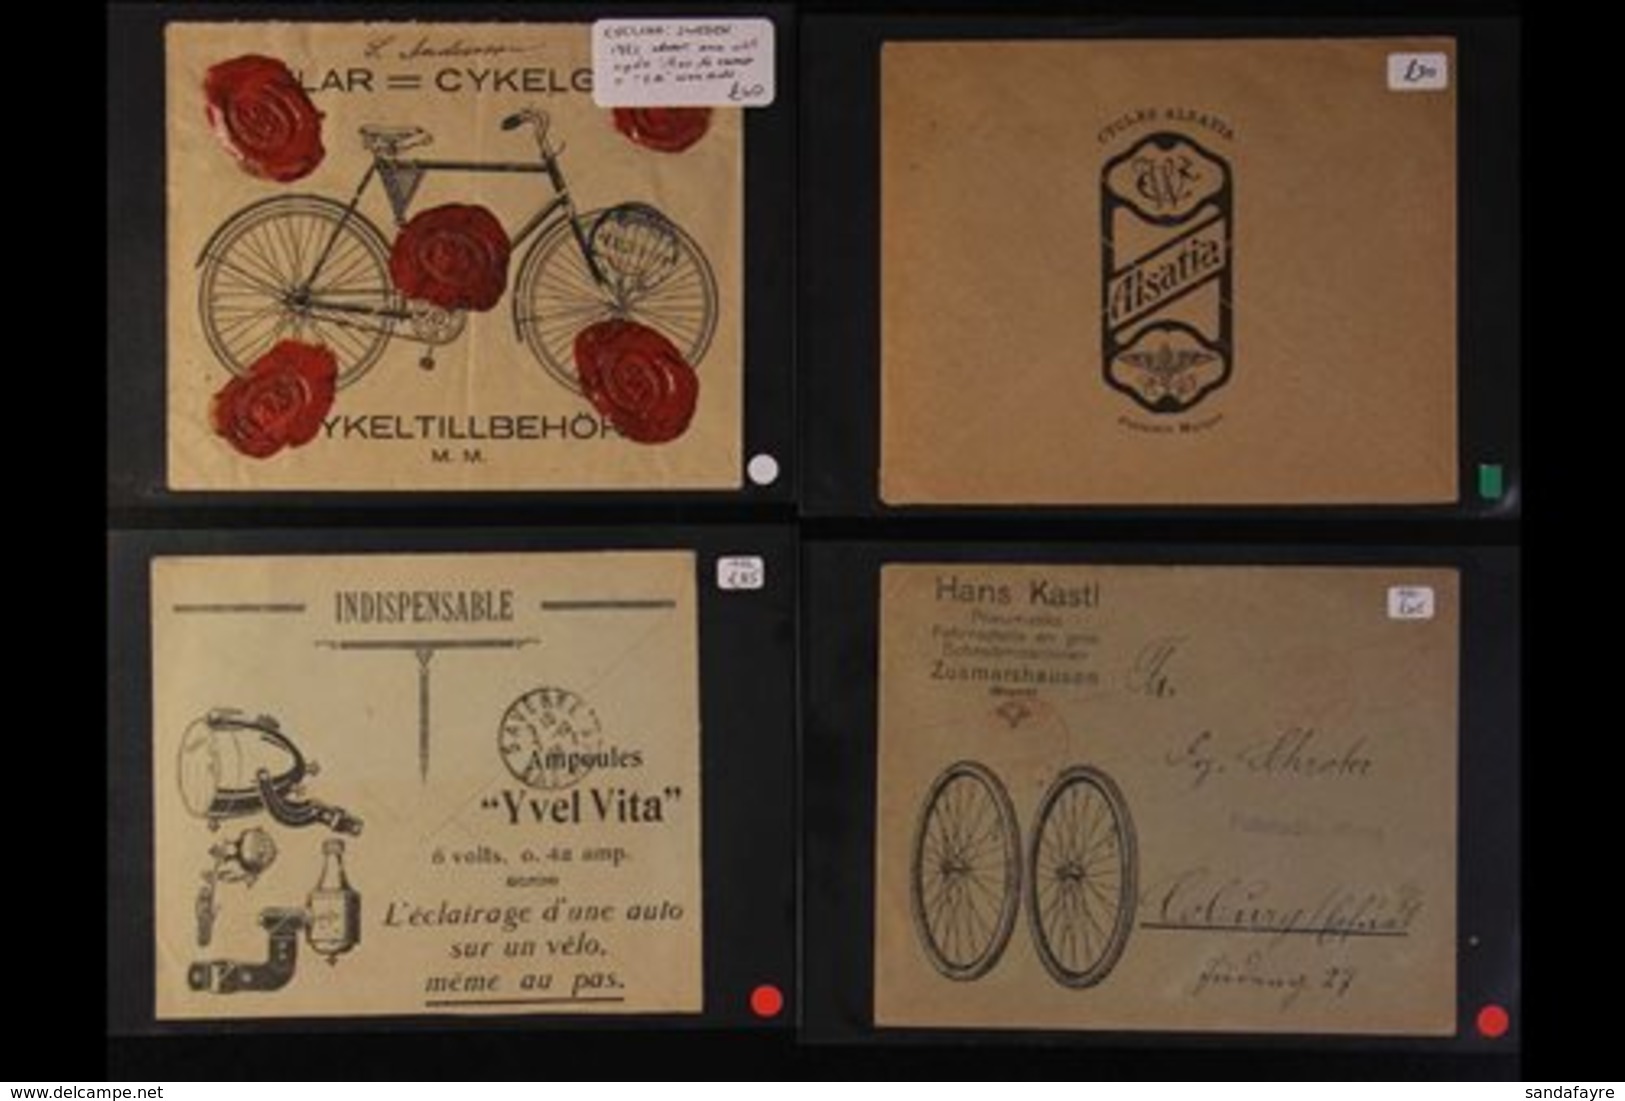 CYCLING Group Of ADVERTISING ENVELOPES With Four Illustrated Envelopes With Bicycle Wheels, Accessories, Bicycle And Log - Unclassified